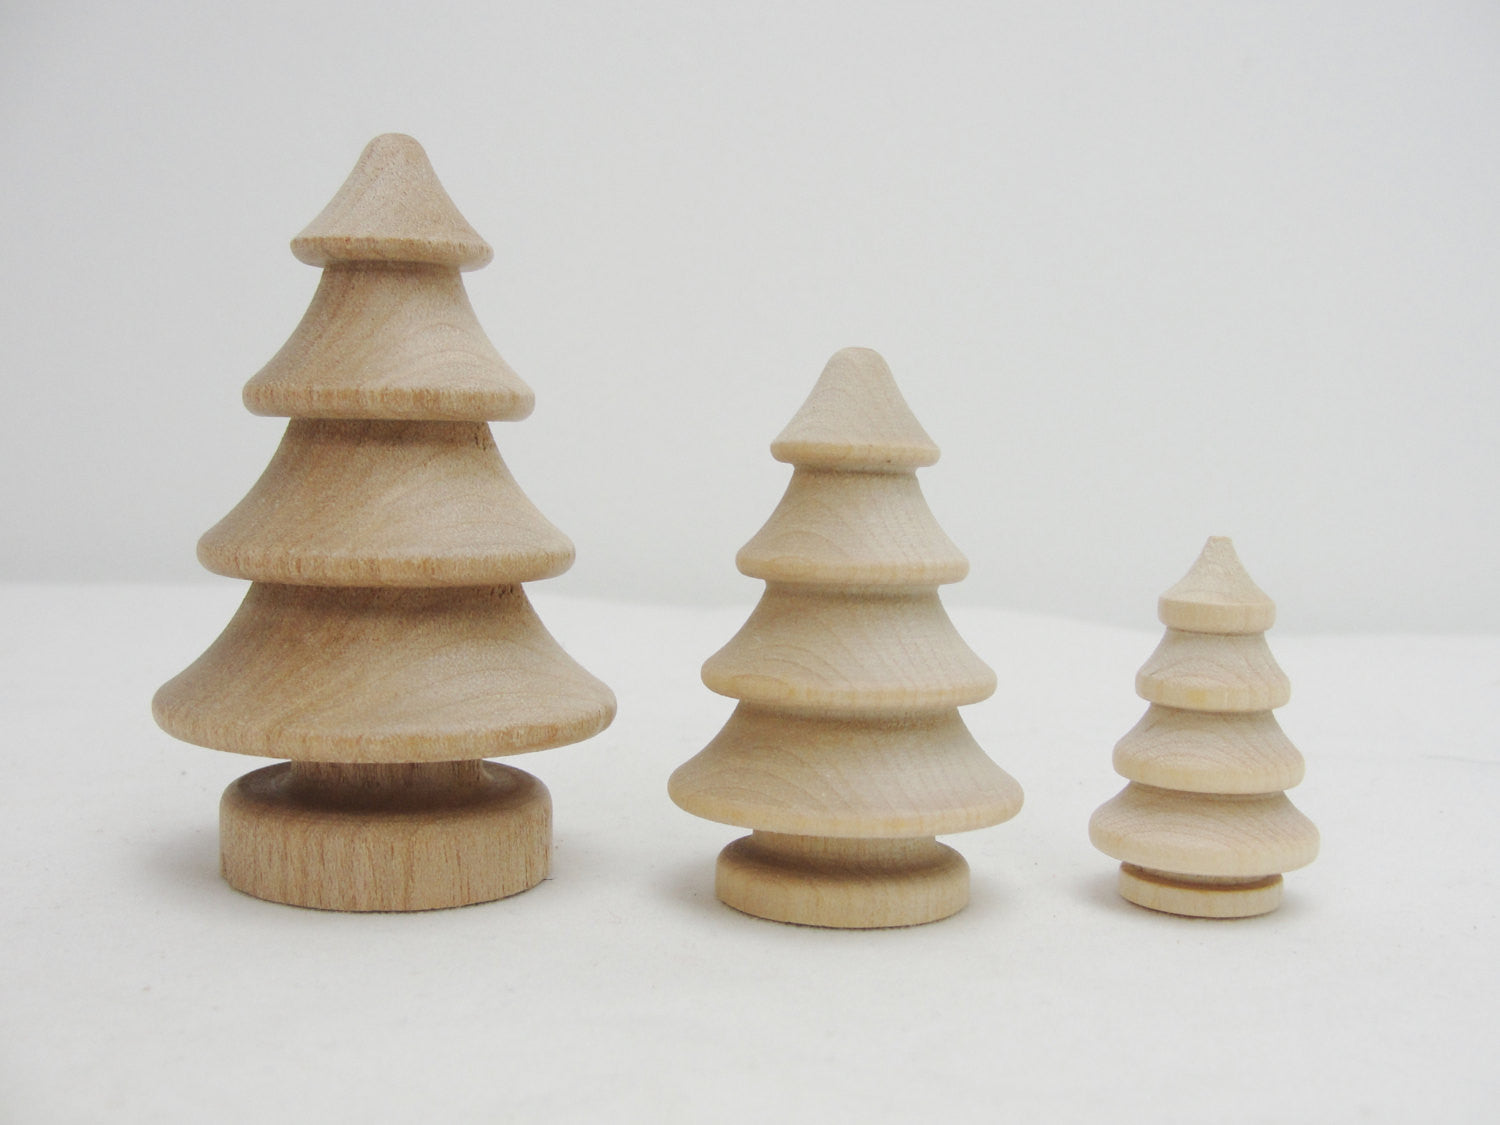 Turned Wooden tree 3 dimensional 2 3/4" set of 6 - Wood parts - Craft Supply House